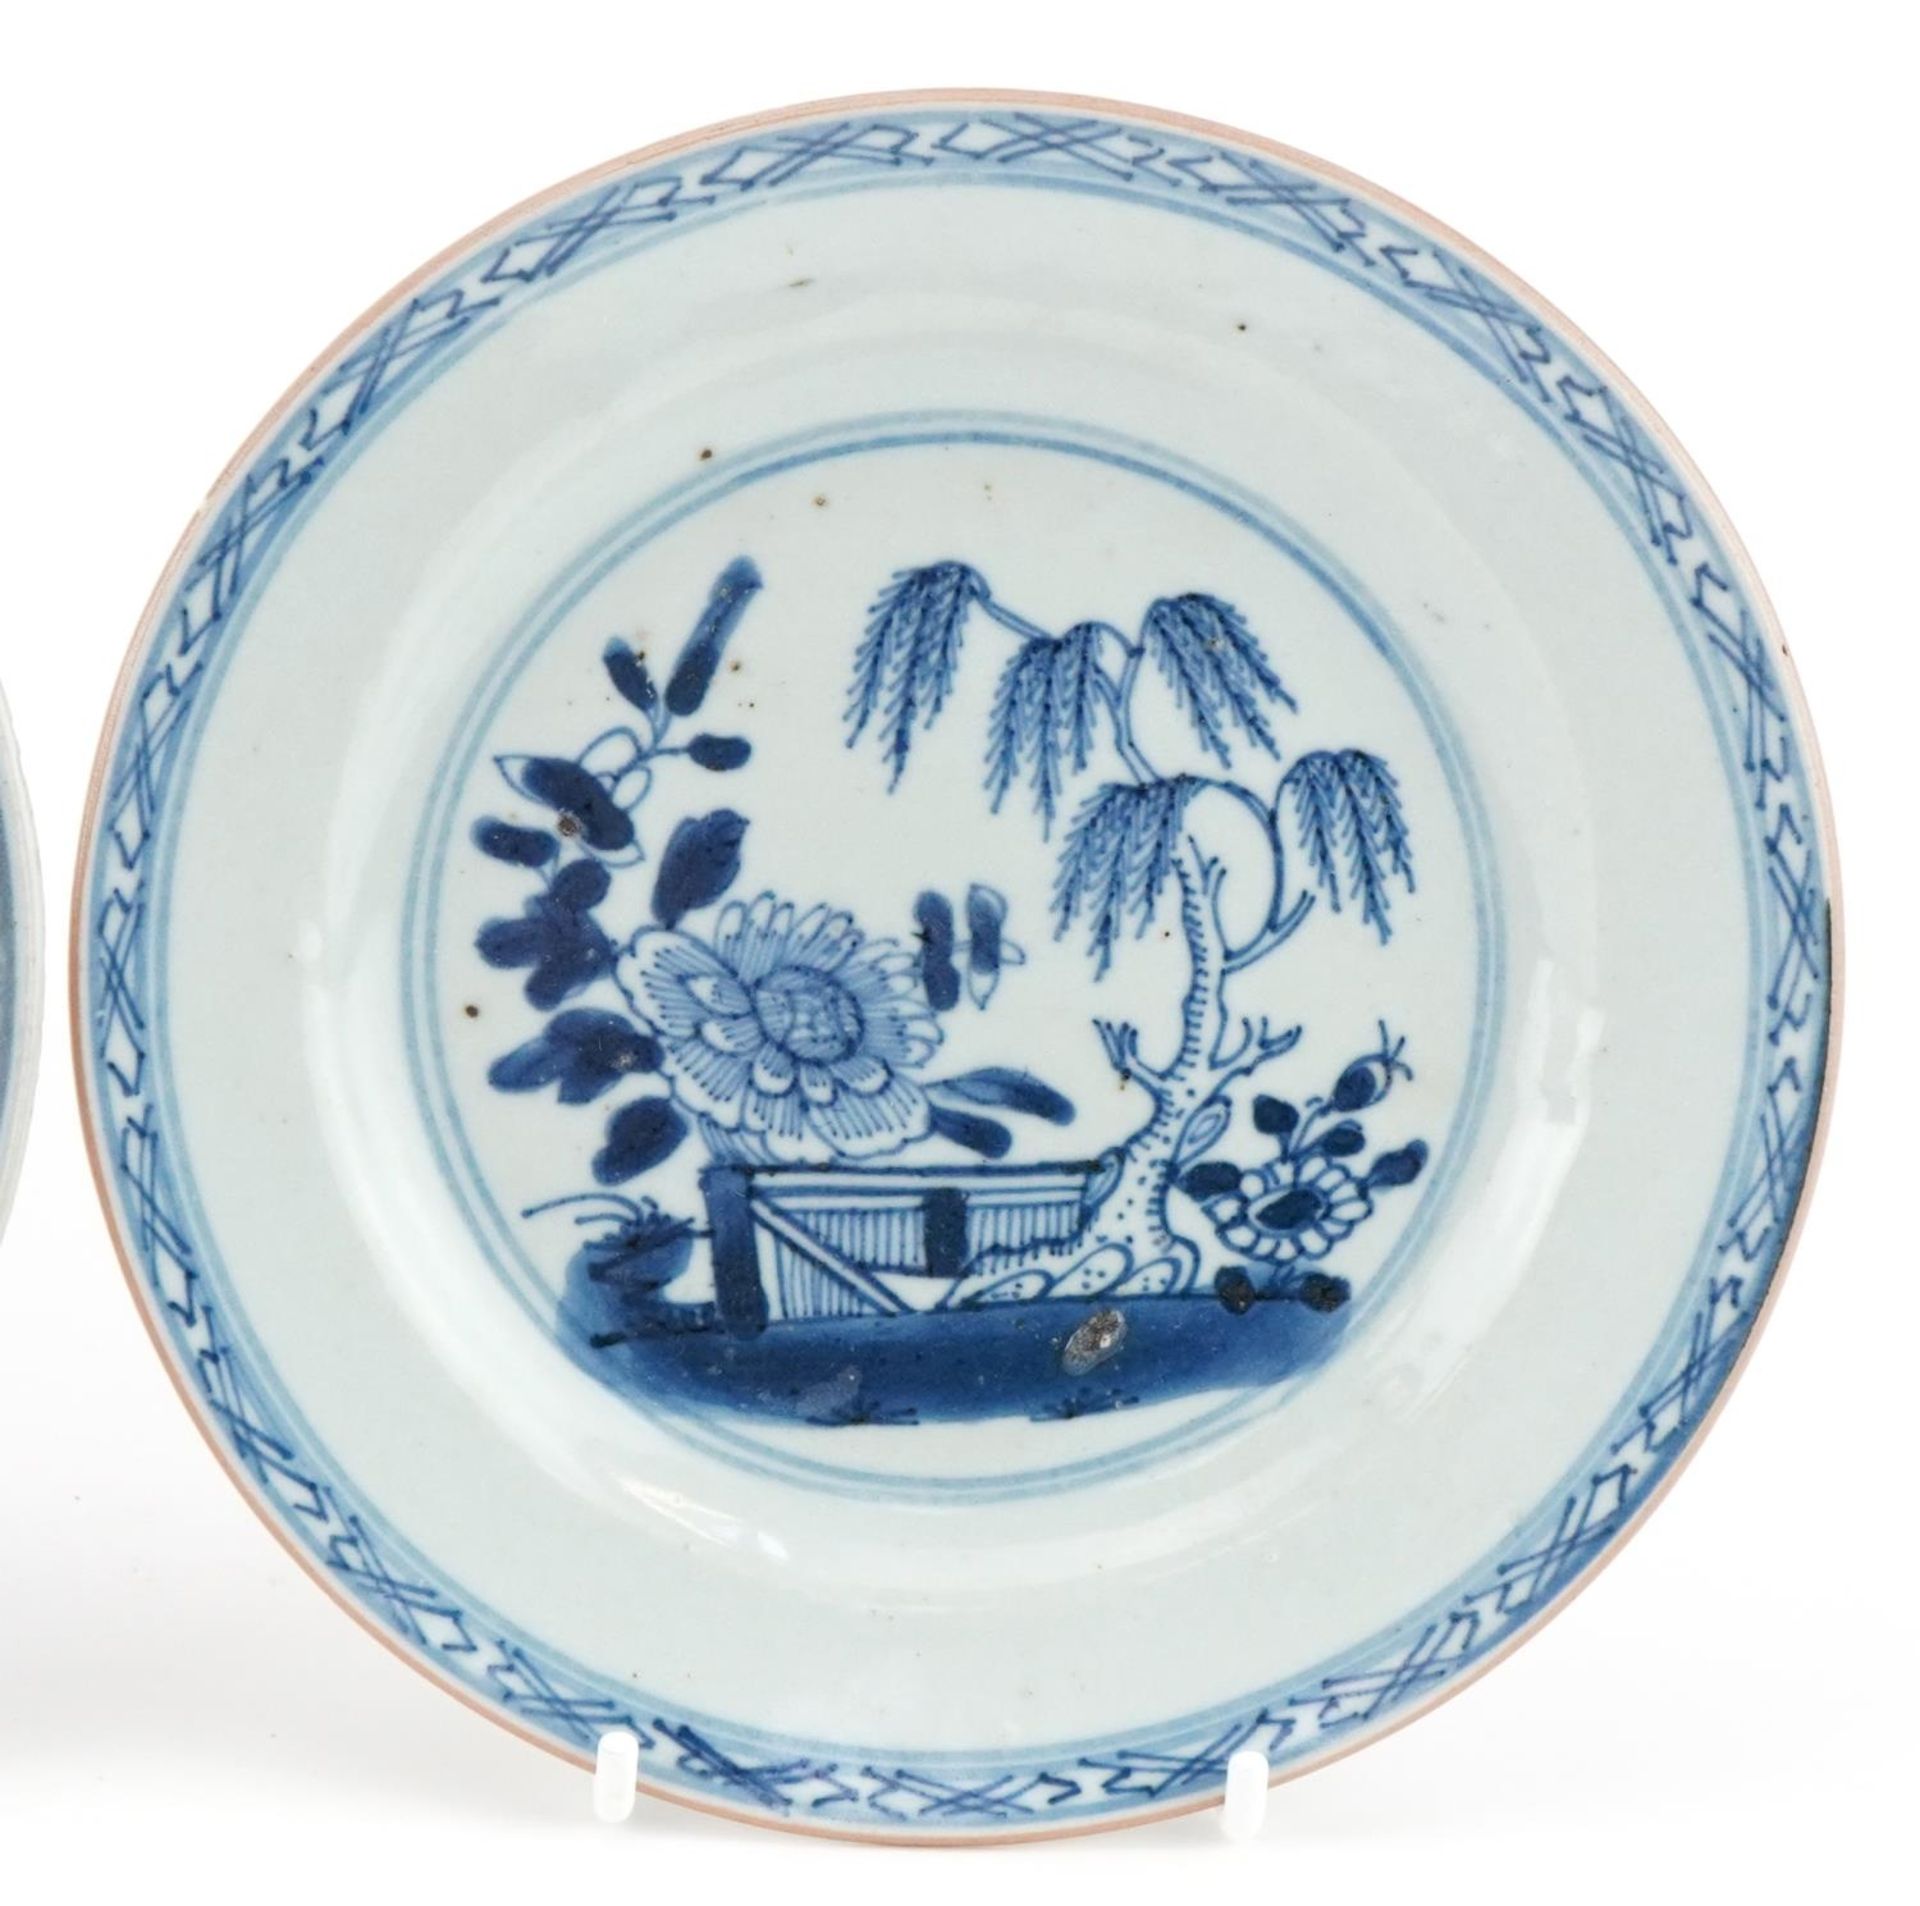 Three 18th century hand painted blue and white plates, two in the Willow pattern, one with - Image 3 of 4